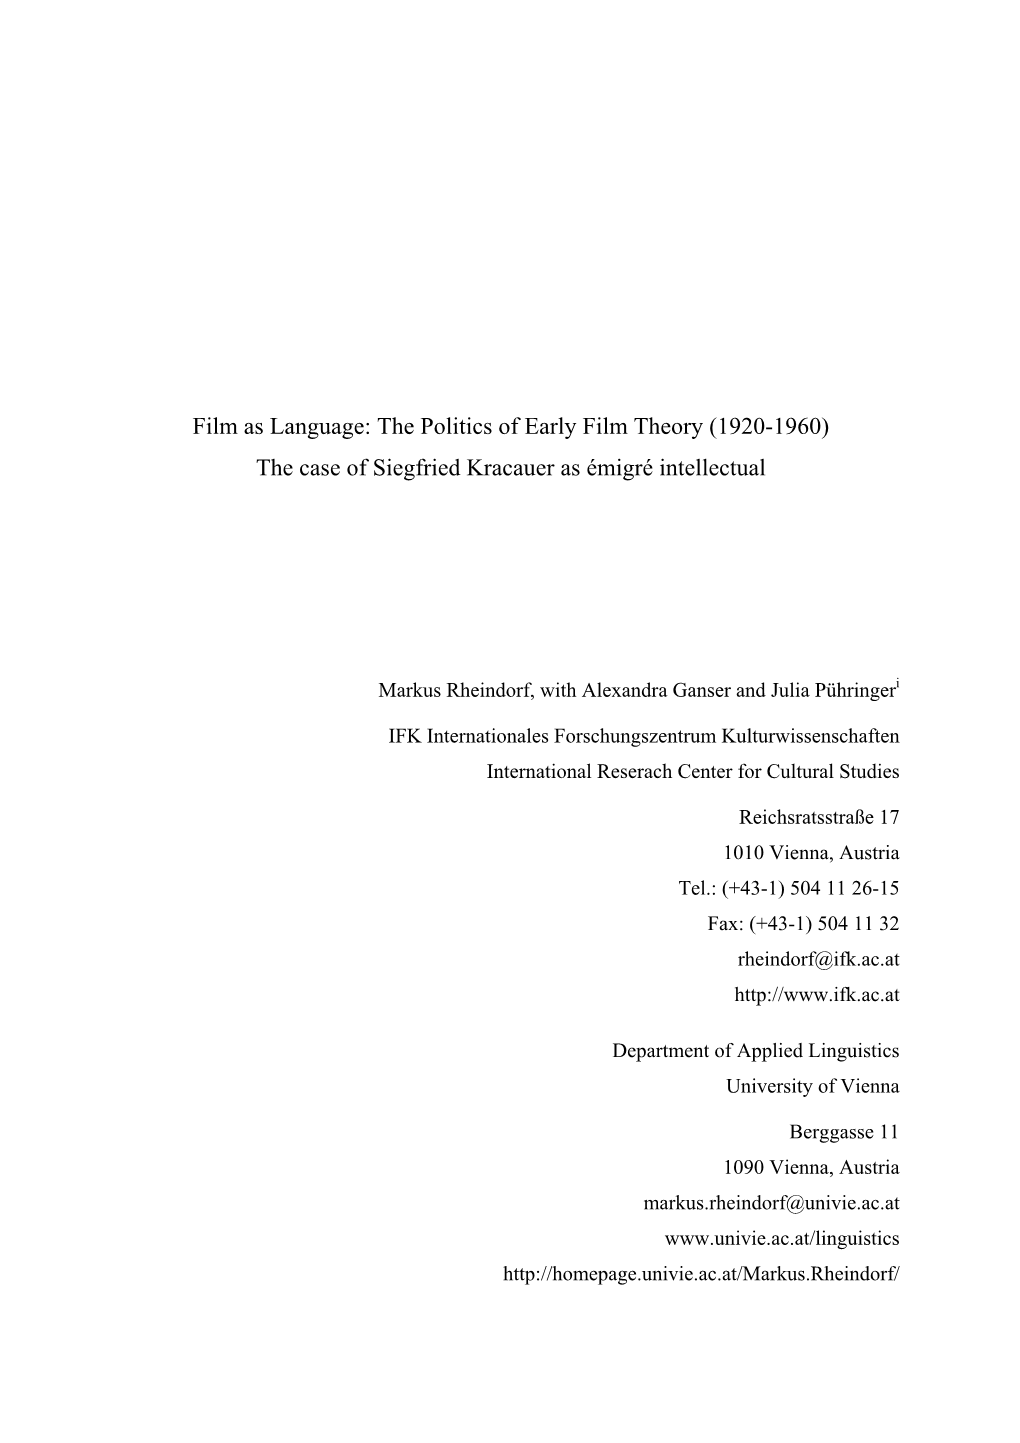 Film As Language: the Politics of Early Film Theory (1920-1960) the Case of Siegfried Kracauer As Émigré Intellectual